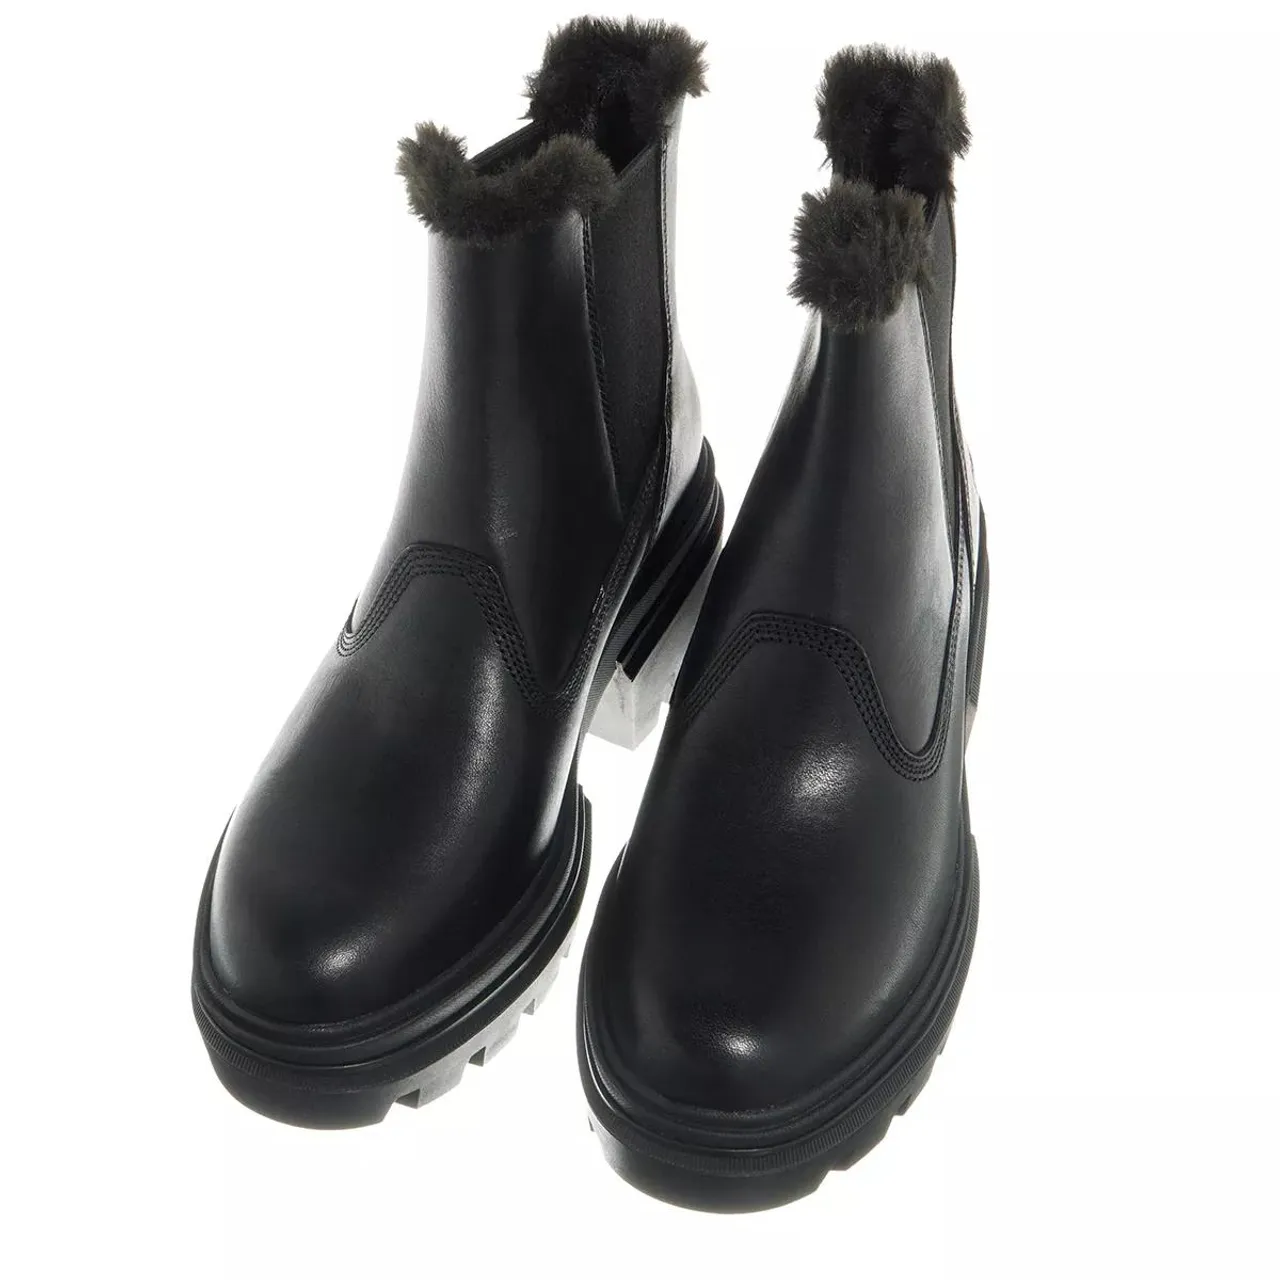 Timberland Boots & Ankle Boots - Everleigh Boot Arm Lined Chelsea - black - Boots & Ankle Boots for ladies